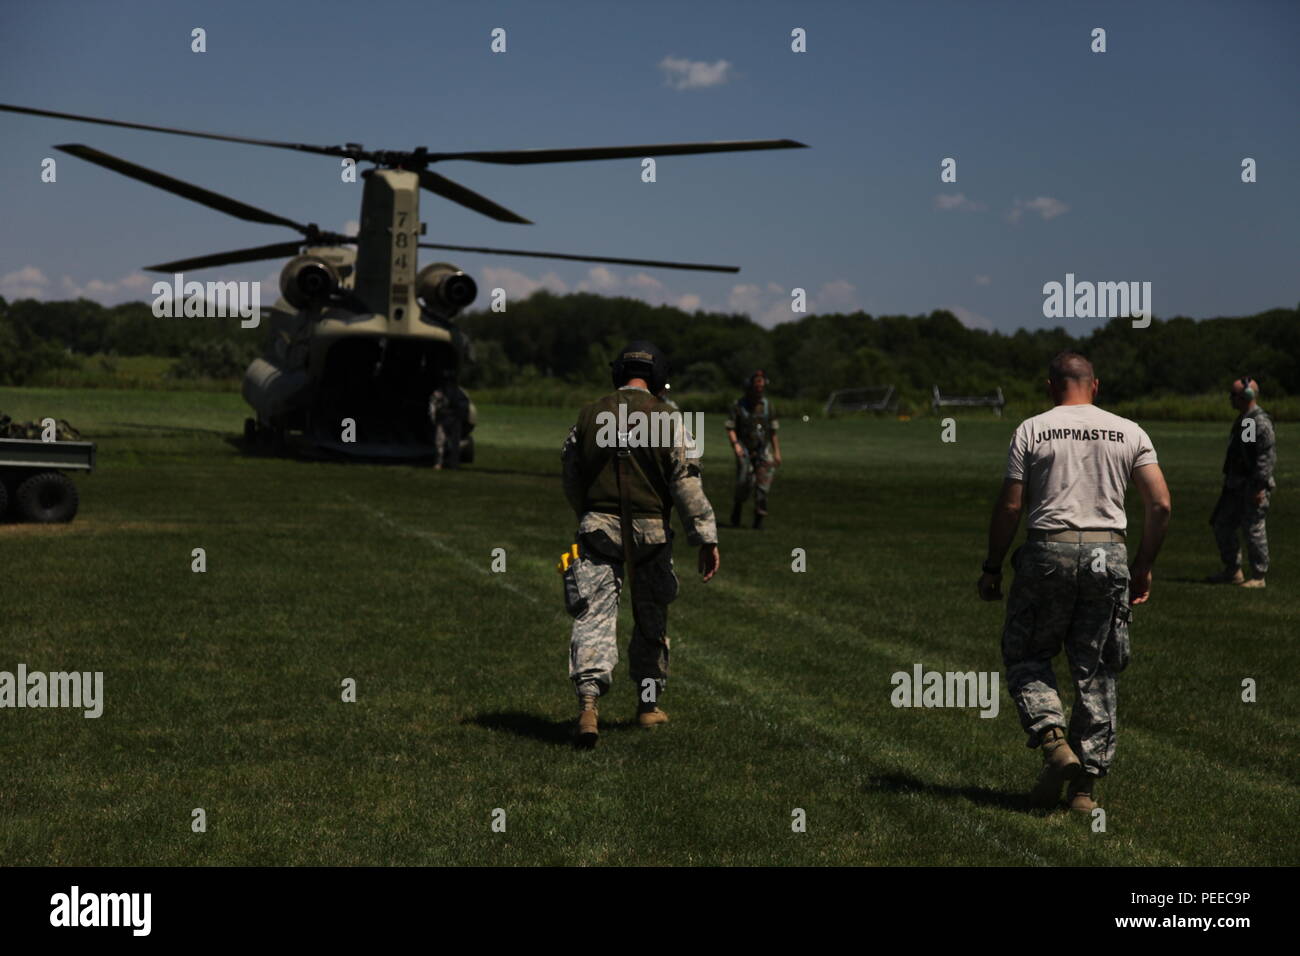 A U.S. Army jumpmaster, along with the flight crew, prepares to board a CH-47 Chinook helicopter prior to a  wing exchange jump at Leapfest in West Kingston, R.I., Aug. 3, 2015. Leapfest is an International parachute competition hosted by the 56th Troop Command, Rhode Island National Guard to promote high level technical training and esprit de corps within the International Airborne community. (U.S. Army Photo by Spc. Josephine Carlson/Released) Stock Photo